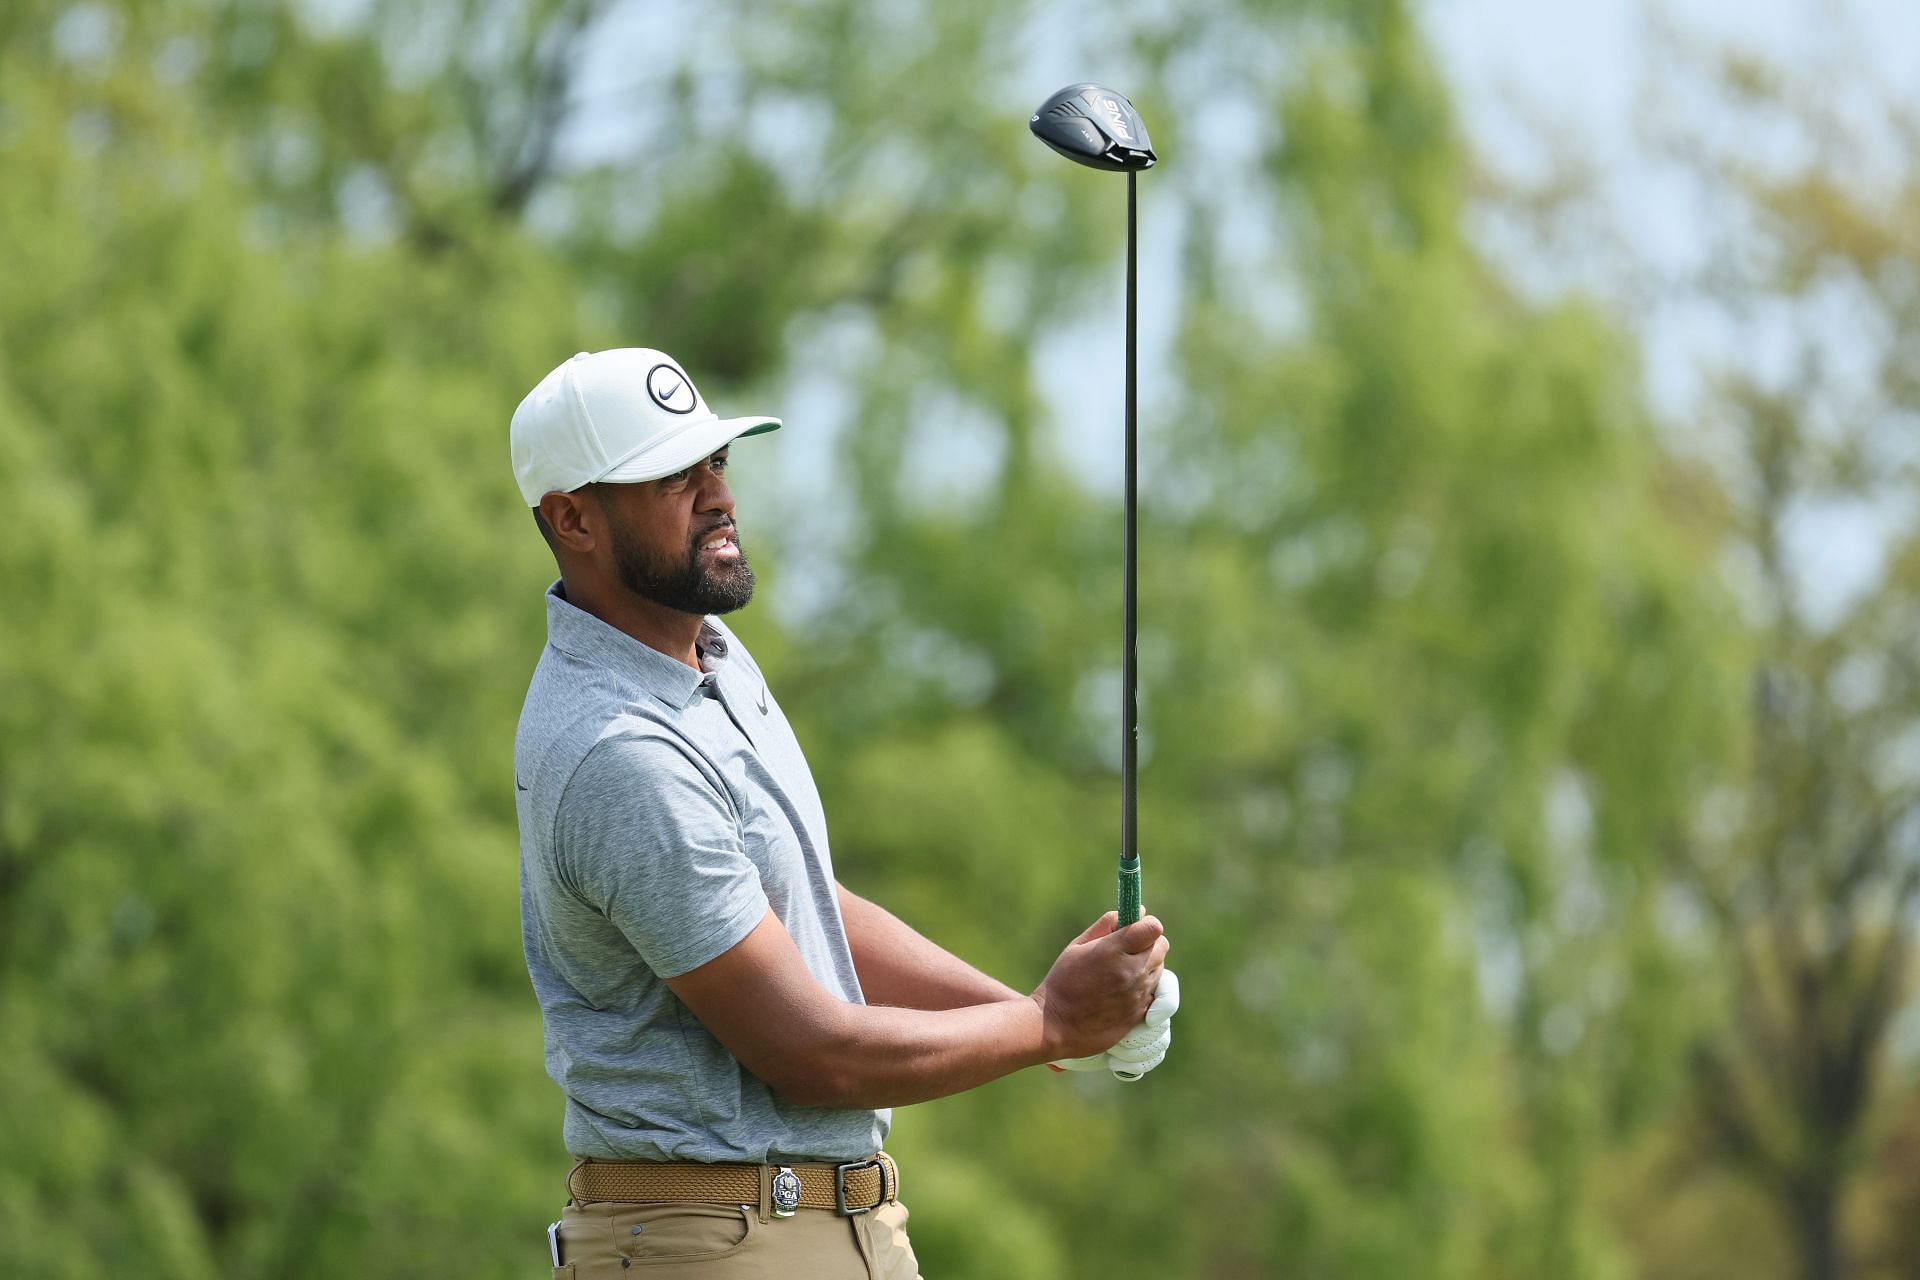 “I feel like a different player” Tony Finau exudes confidence in his